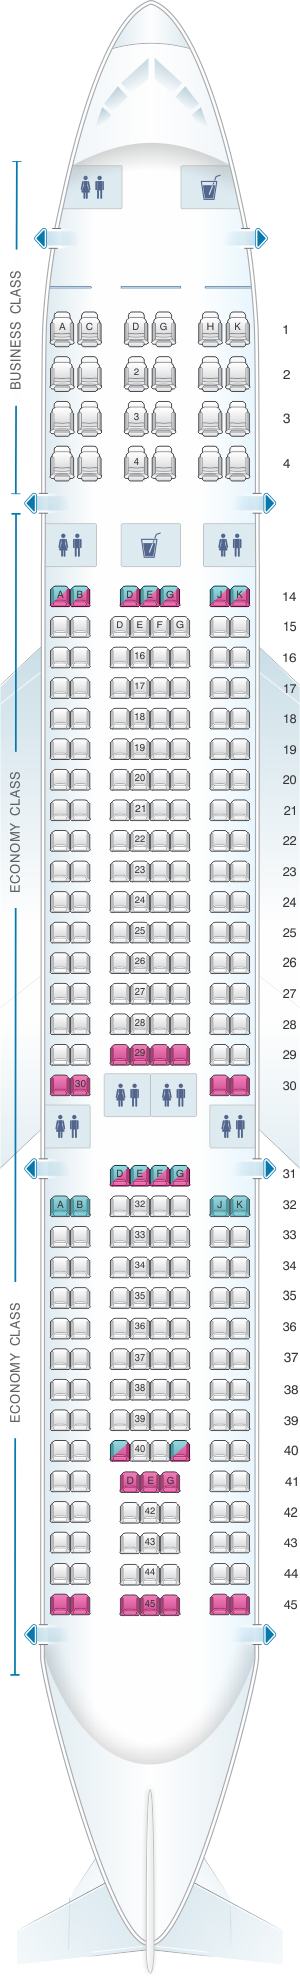 Seat map for Vietnam Airlines Airbus A330 200 266PAX